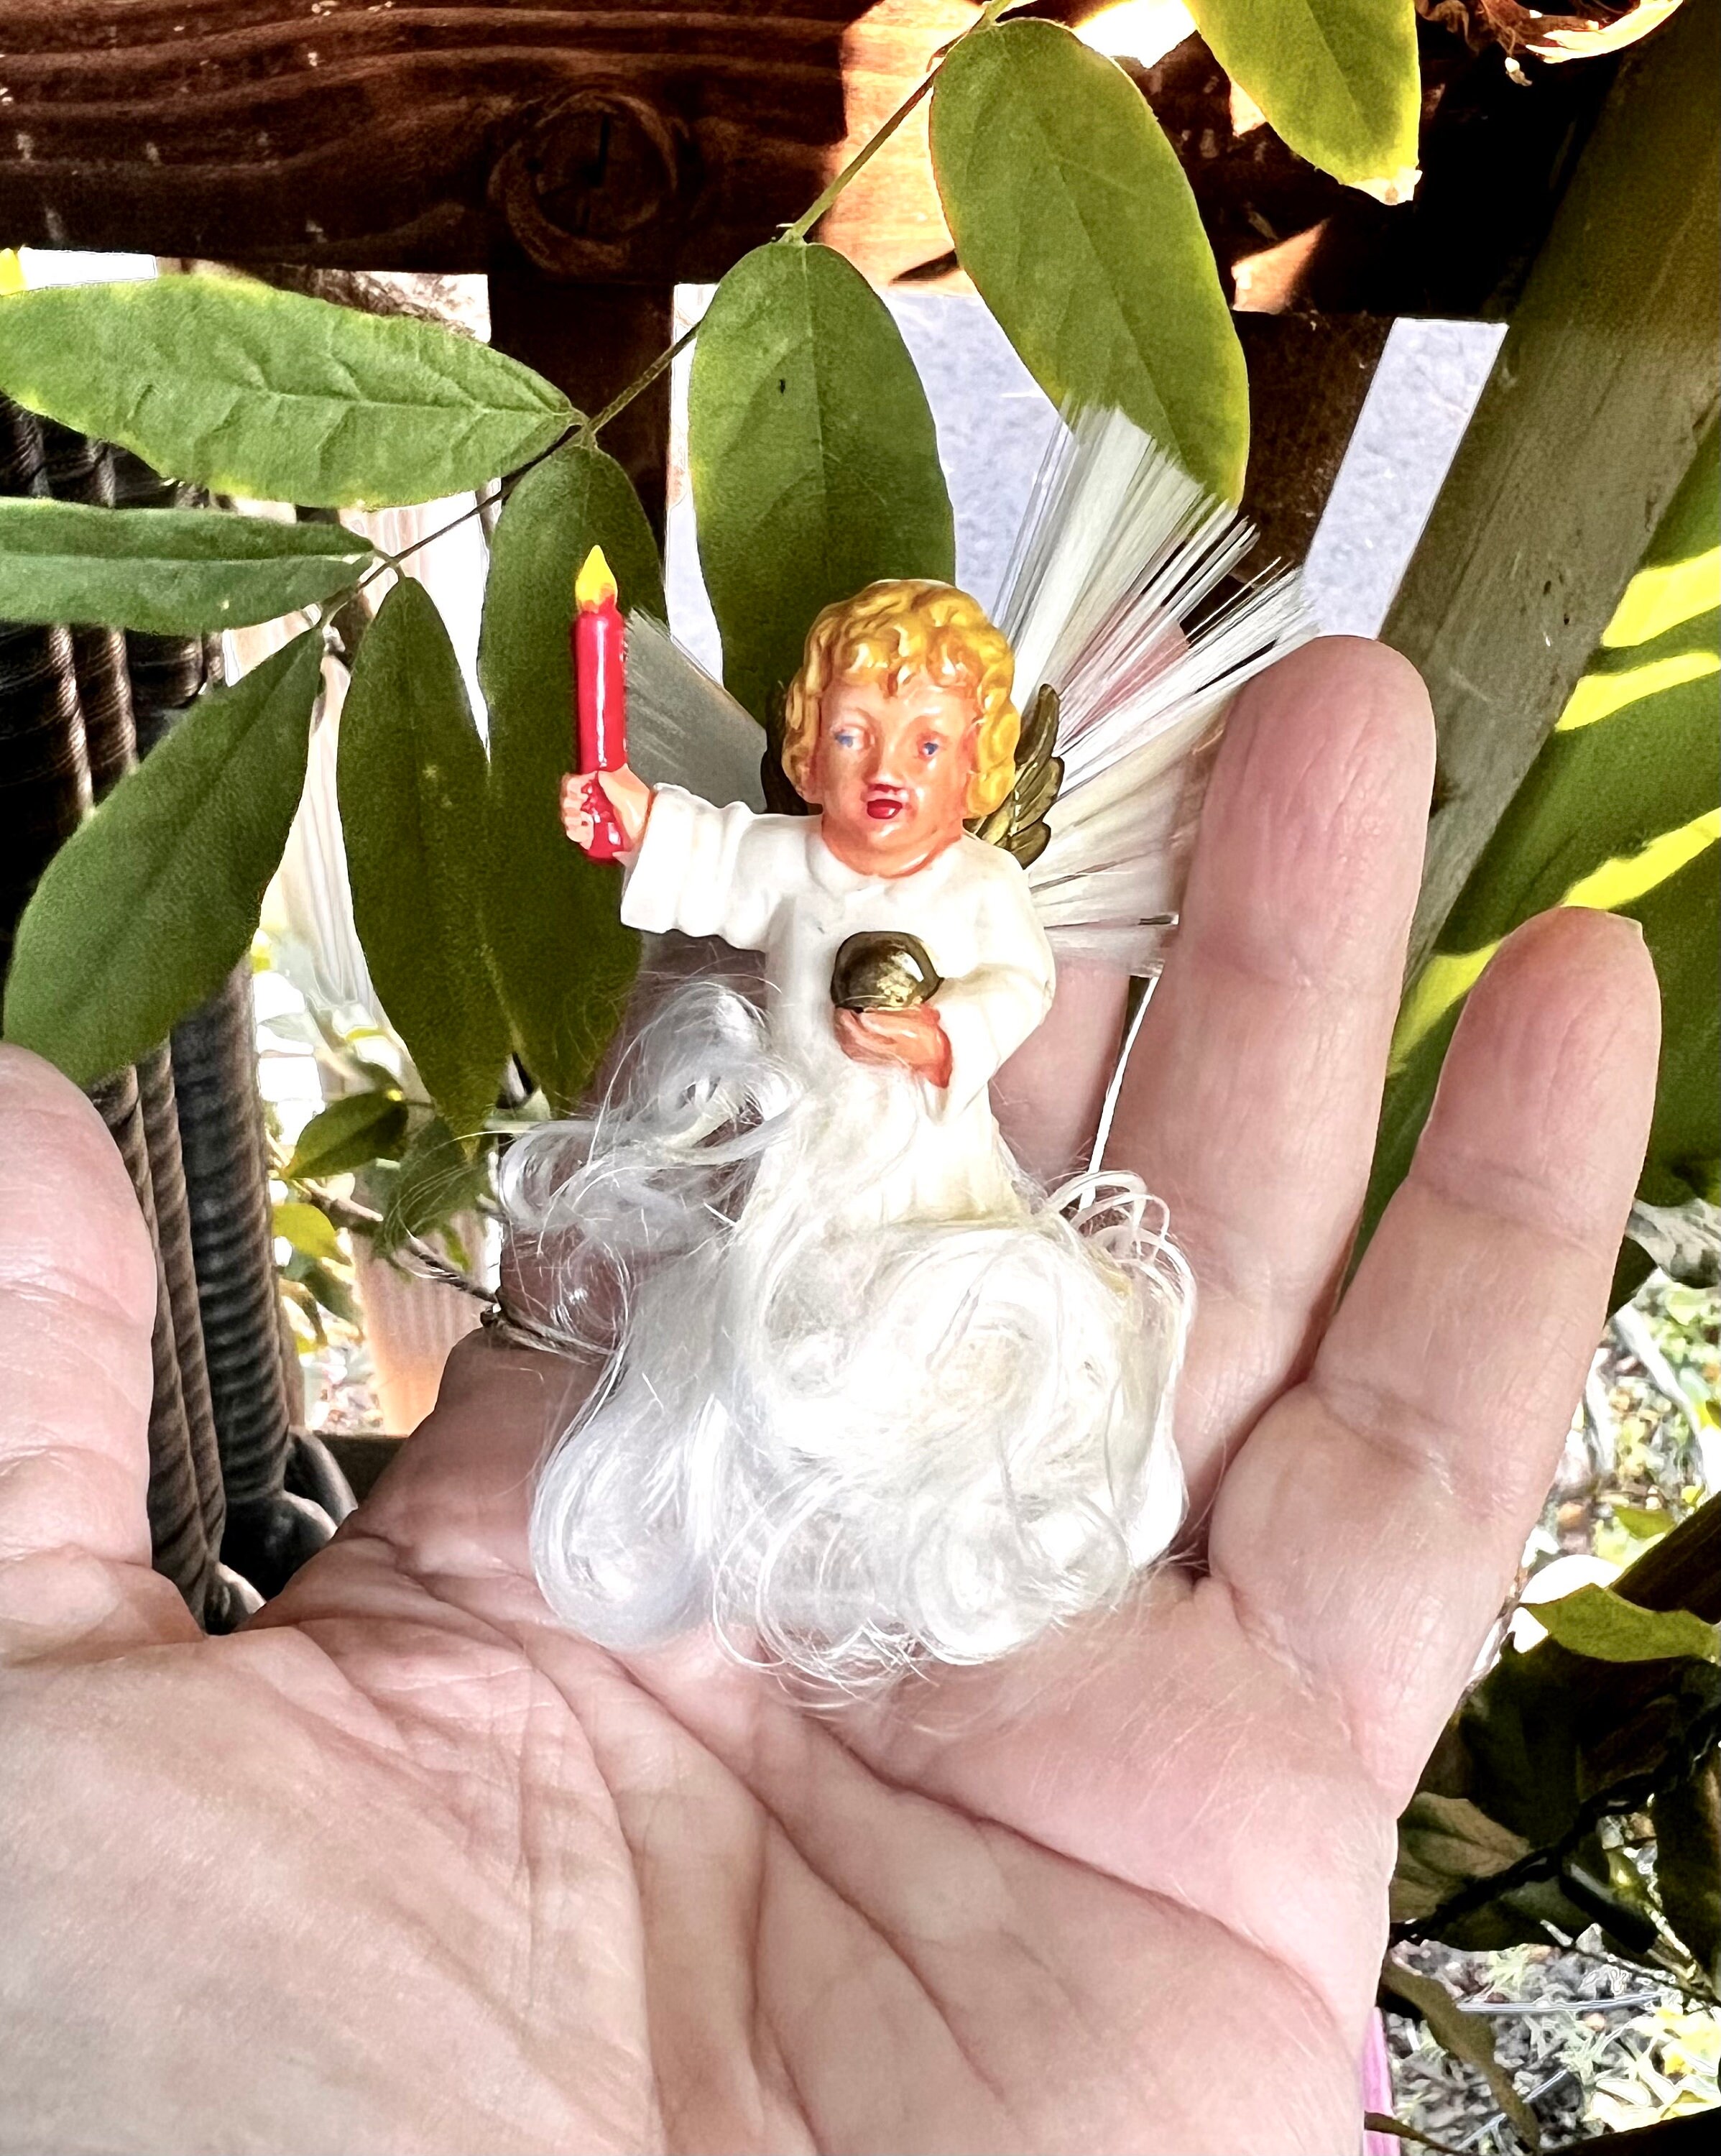  Customer reviews: Angel Cloud Spun Glass Angel Hair for  Christmas & Other Decorating